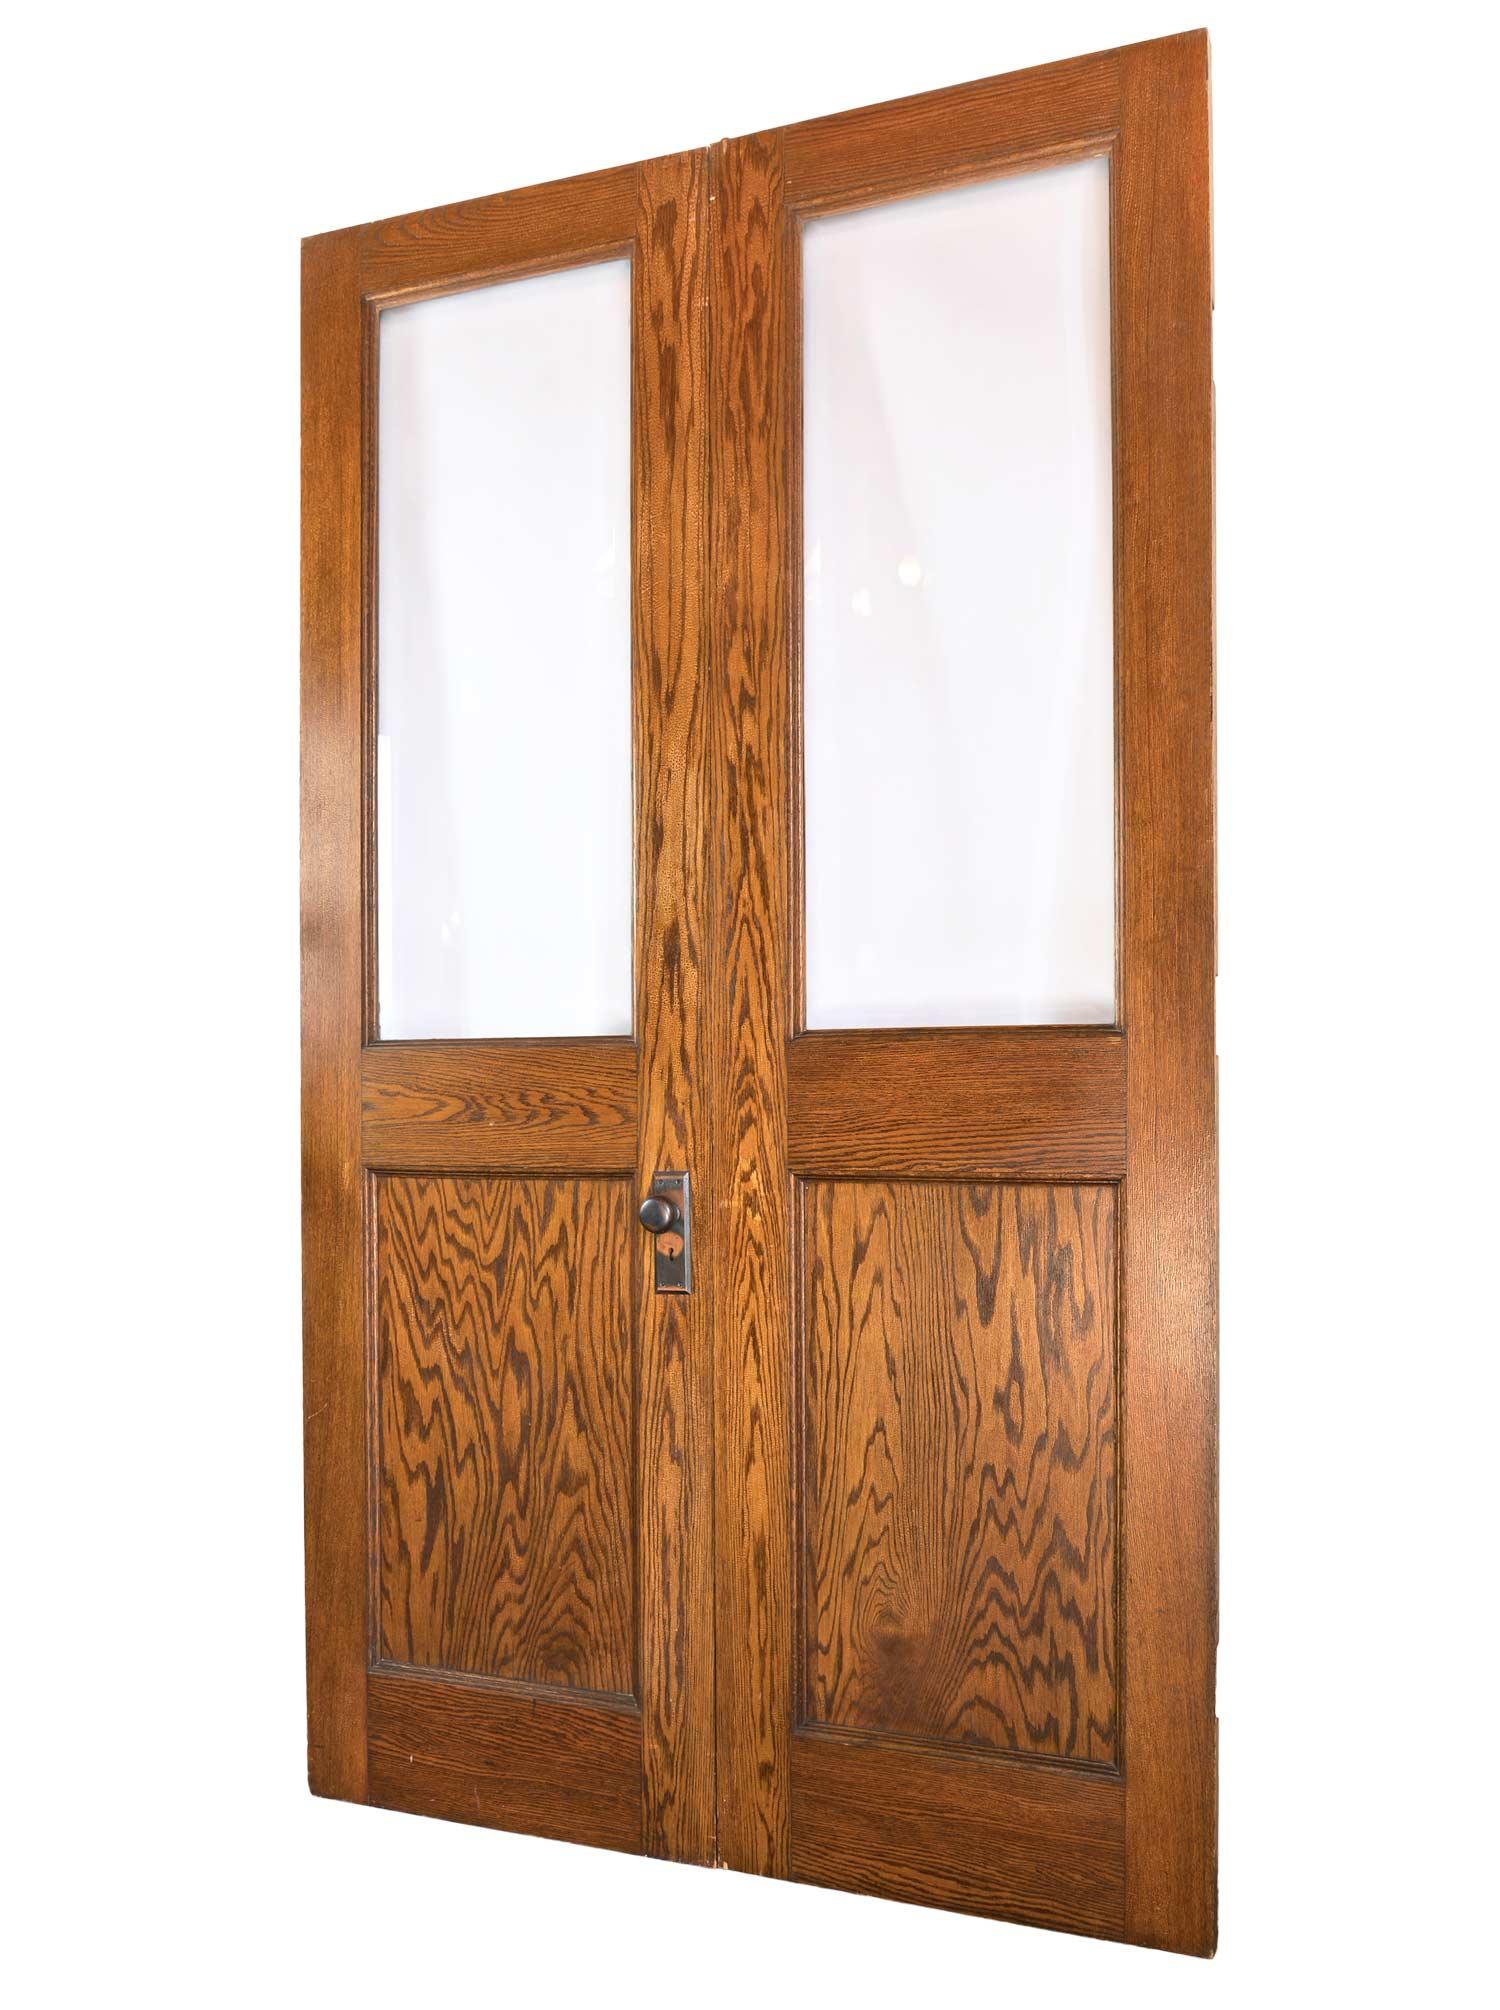 American Tall Oak Double Doors with Beveled Glass Windows